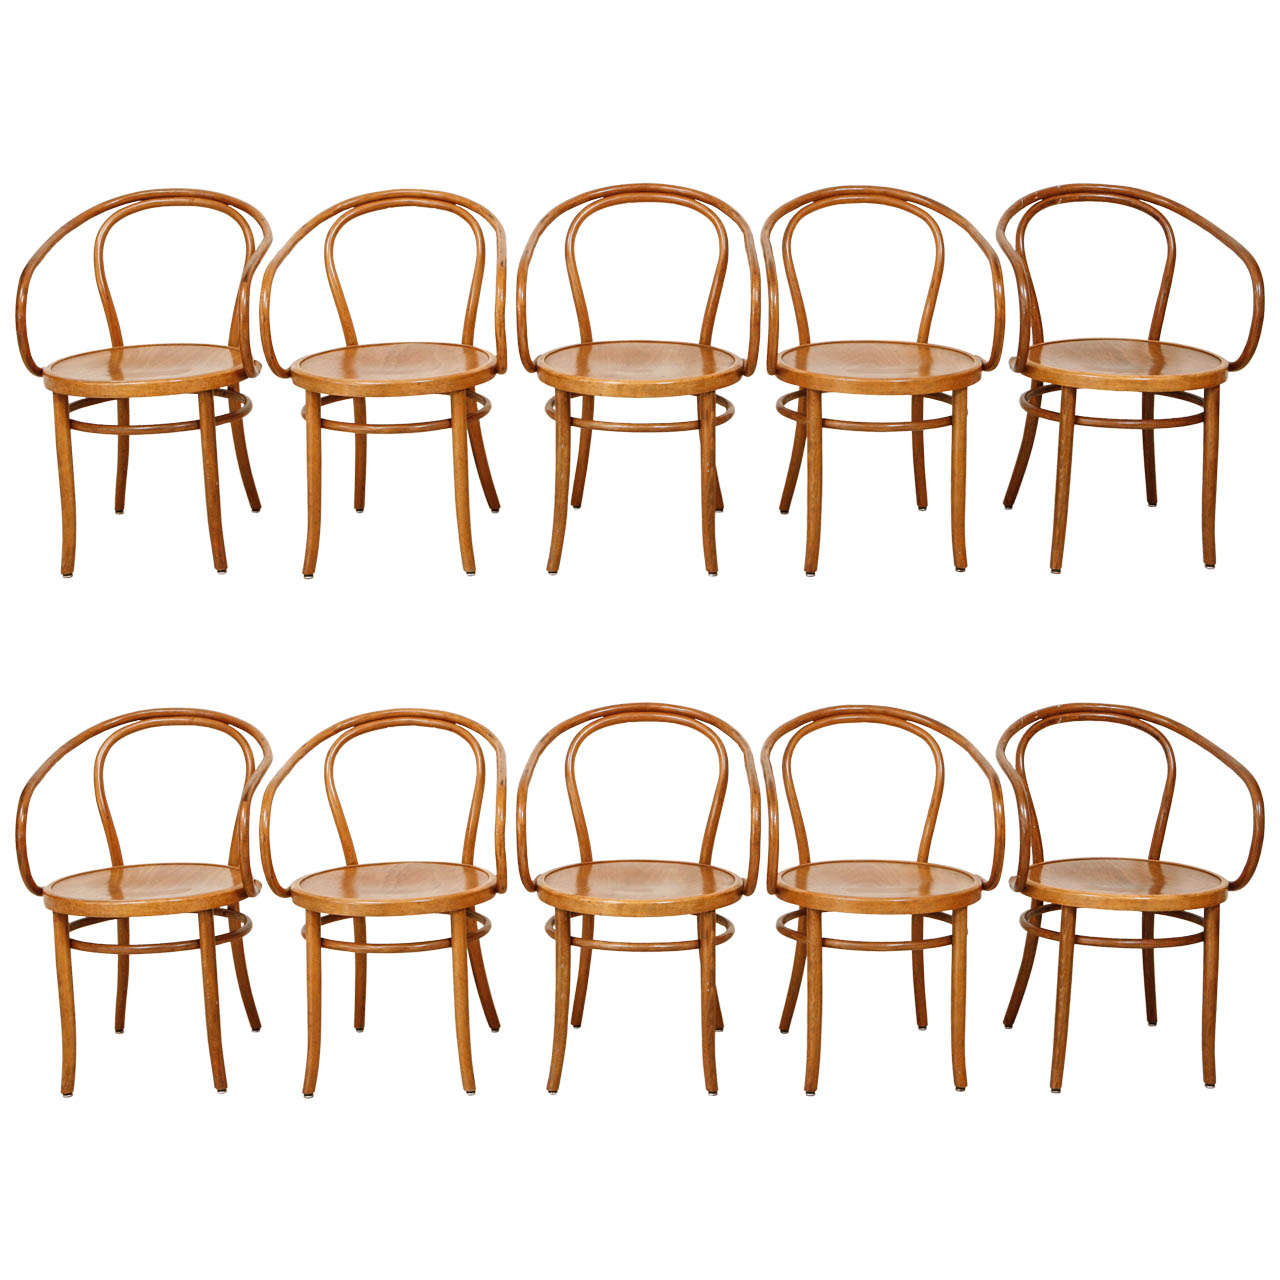 Set of 10 Thonet Chairs